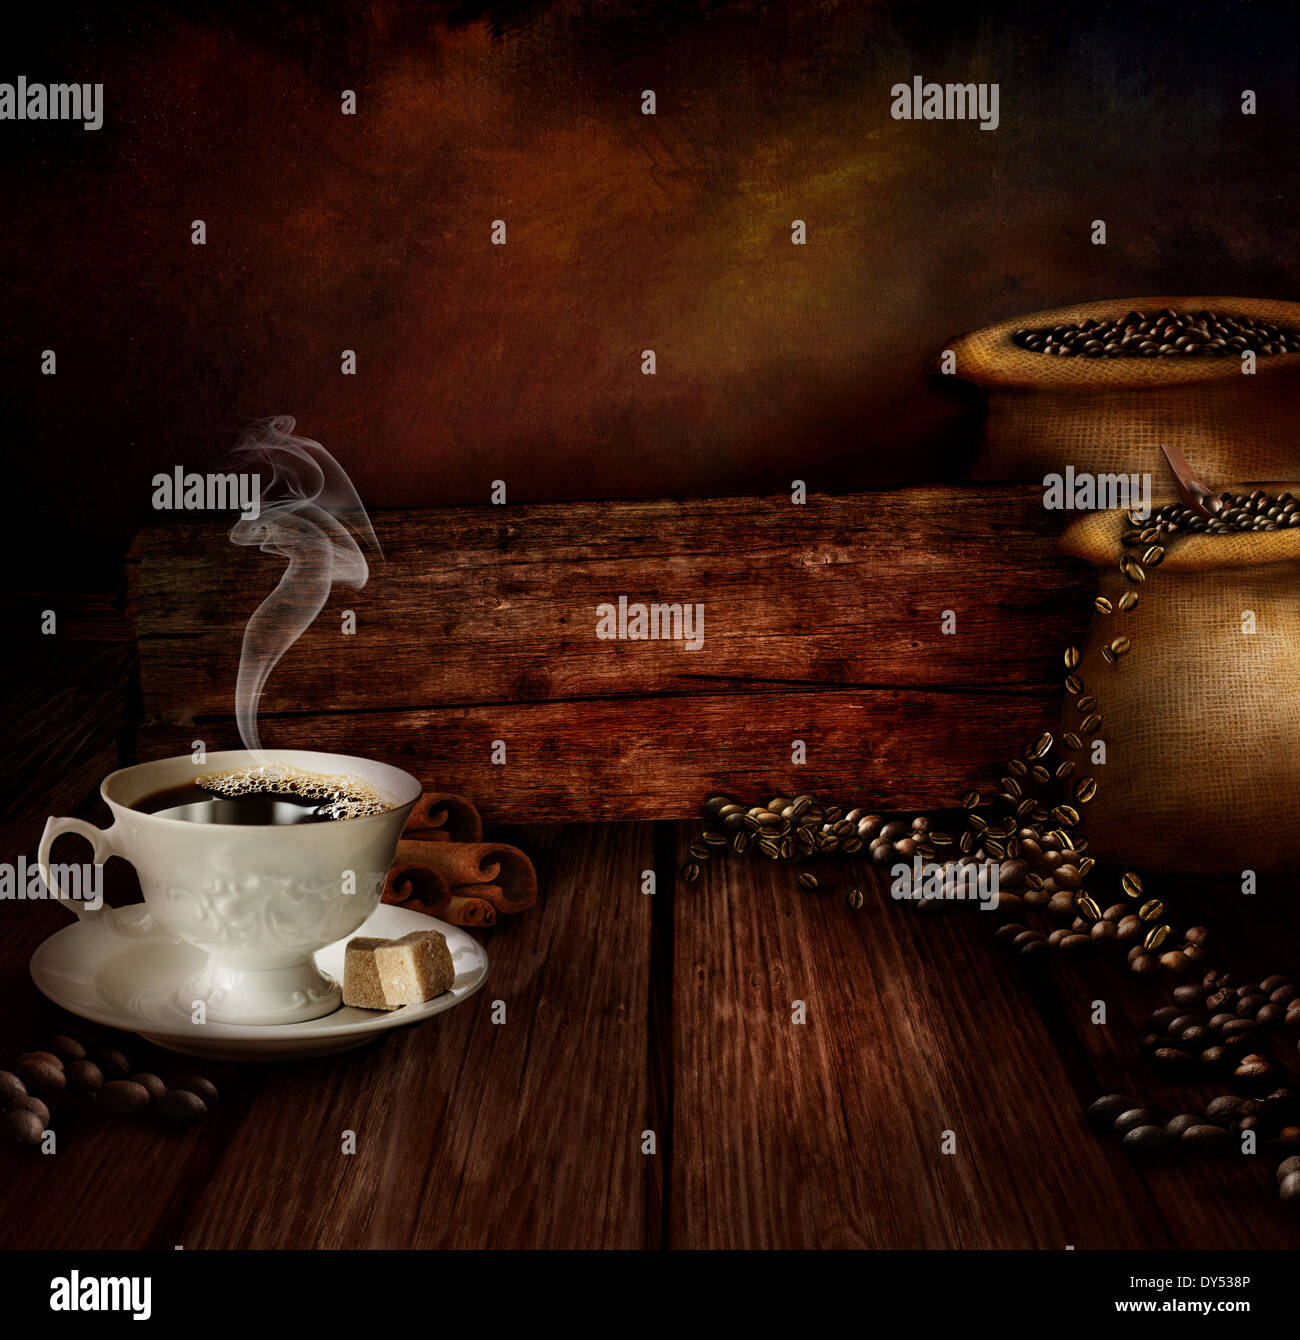 Coffee design - Black coffee. Background with Wooden table with black  coffee cup and steam. Damask background Stock Photo - Alamy